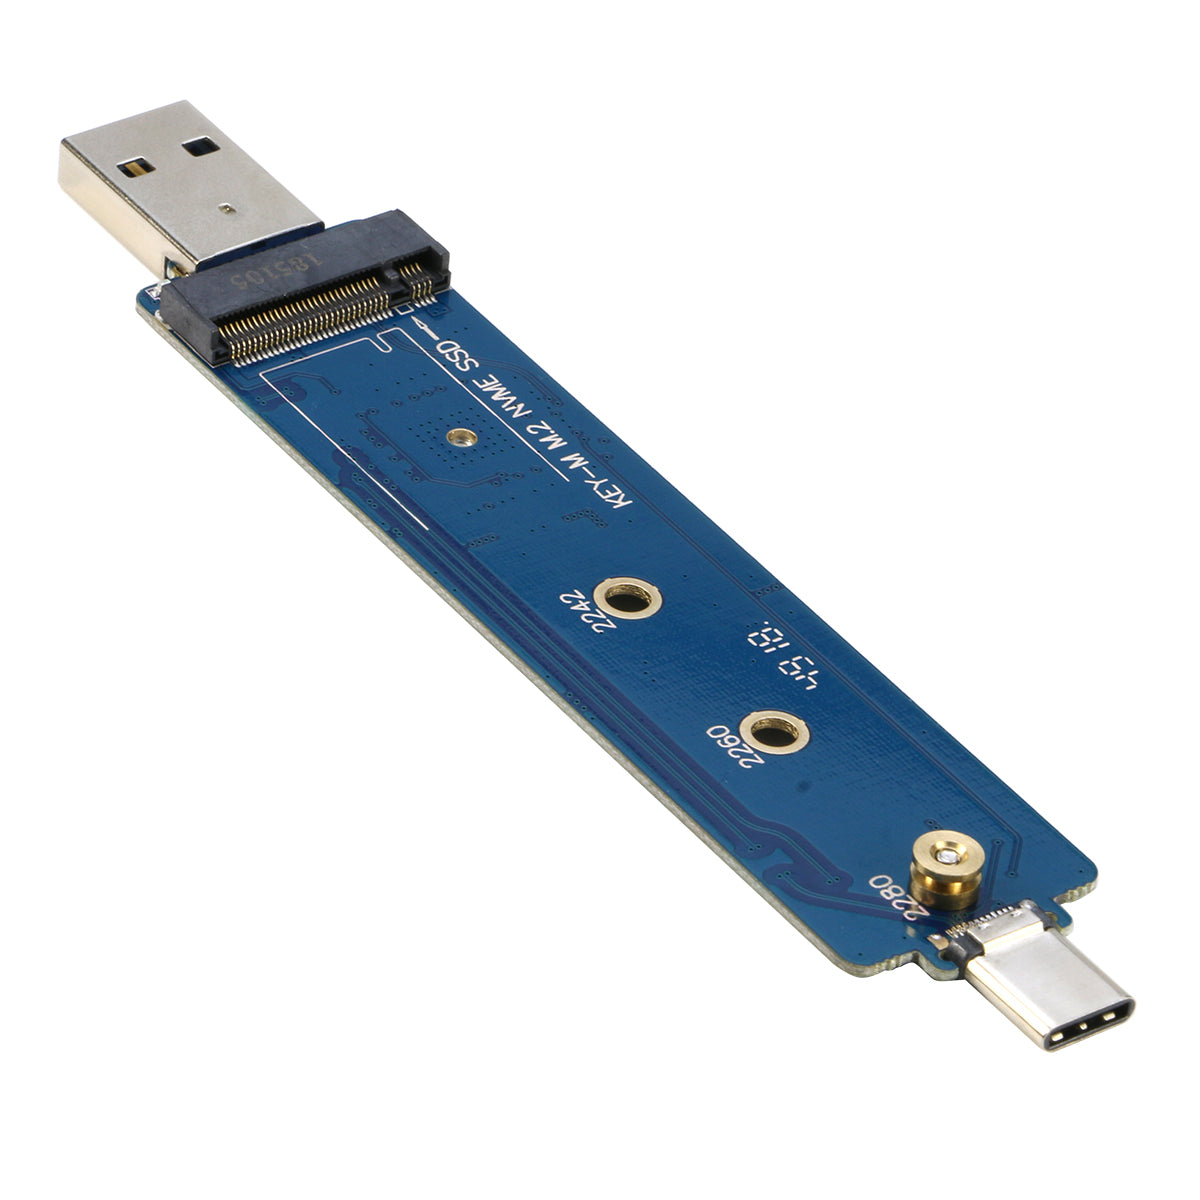 Riitop Nvme Usb Adapter Pcie M2 Nvme Ssd To Usb 31 Gen2 Type A And T 0736